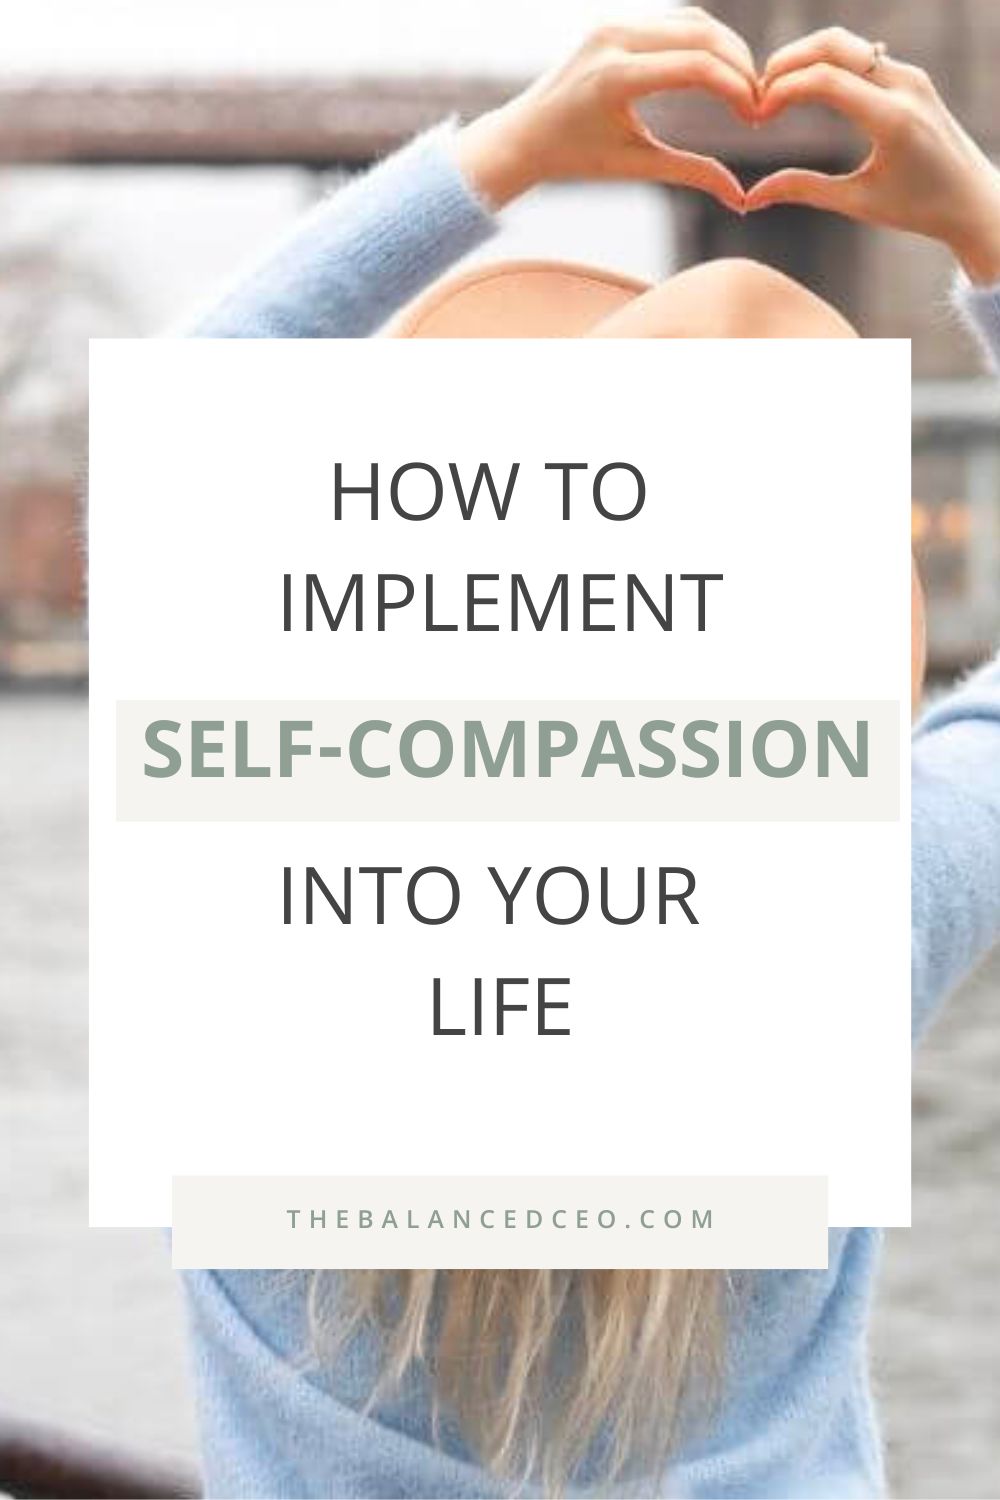 Self-Compassion: What It is and How to Implement It in Your Daily Life